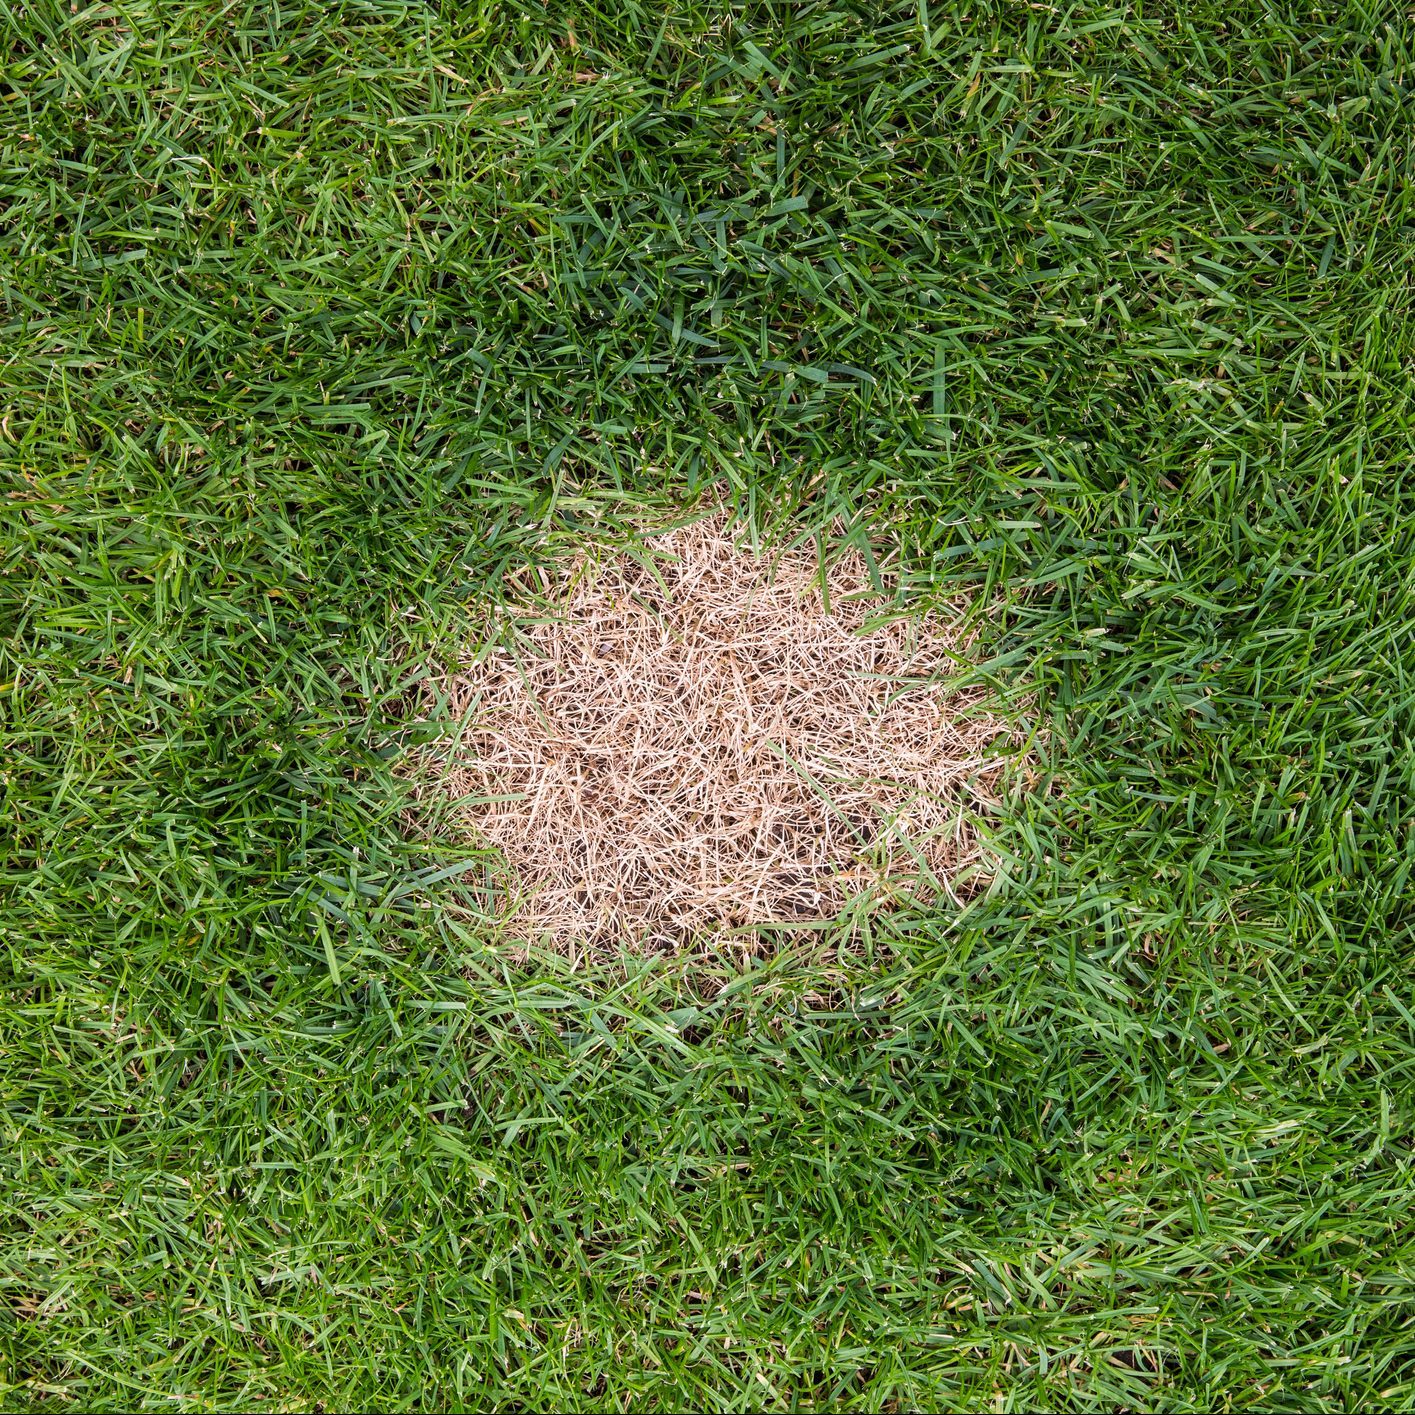 A brown spot of dead grass on a green grass lawn caused by excessive nitrogen in dog urine